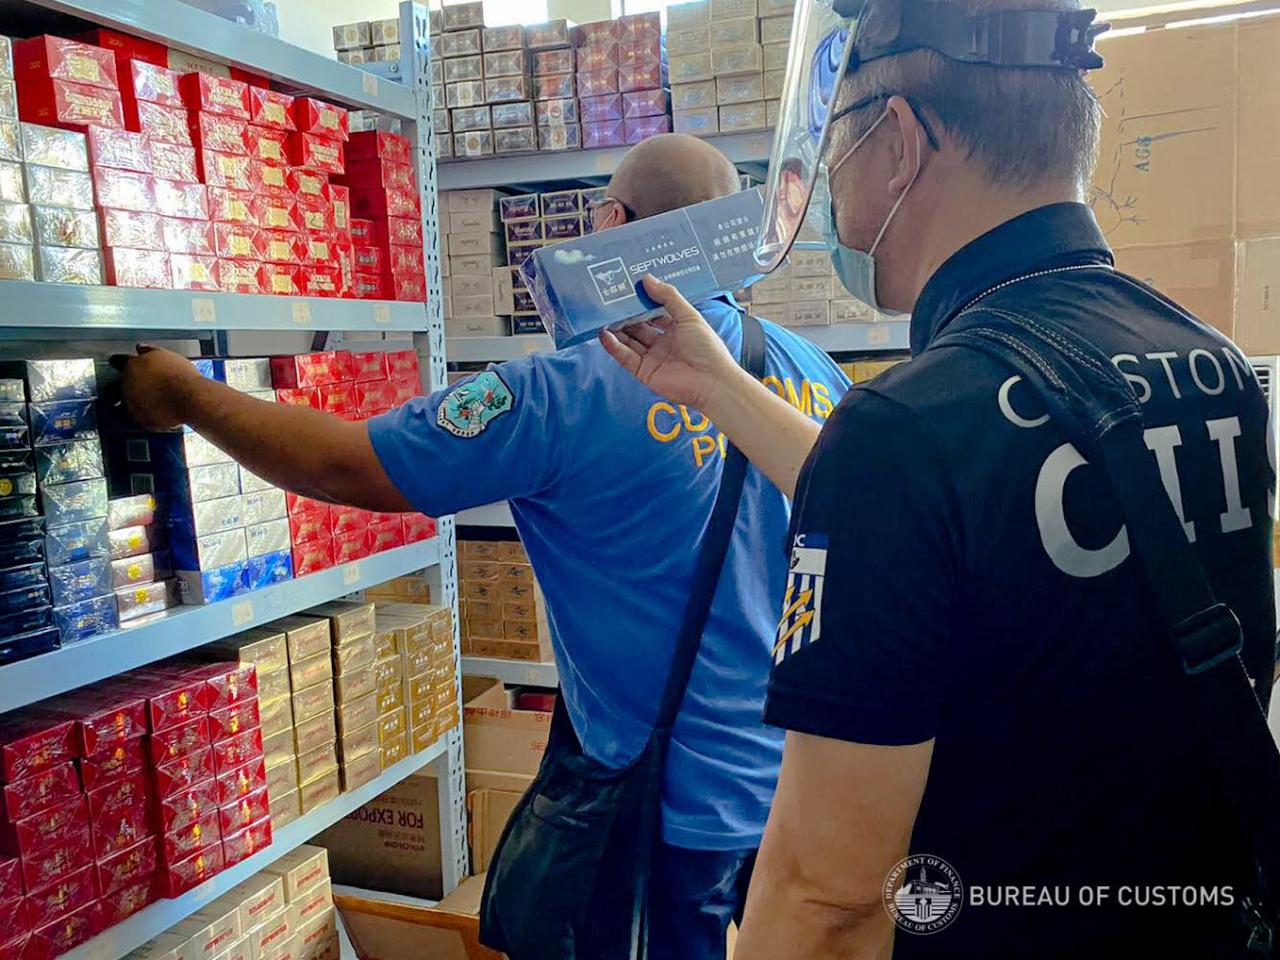 Personnel of the Bureau of Customs confiscate around P10 million worth of smuggled cigarettes, as well as unlicensed firearms and other items during a raid in a store and storage facility in Makati City on Tuesday, August 25, 2020. (Photo from BOC)